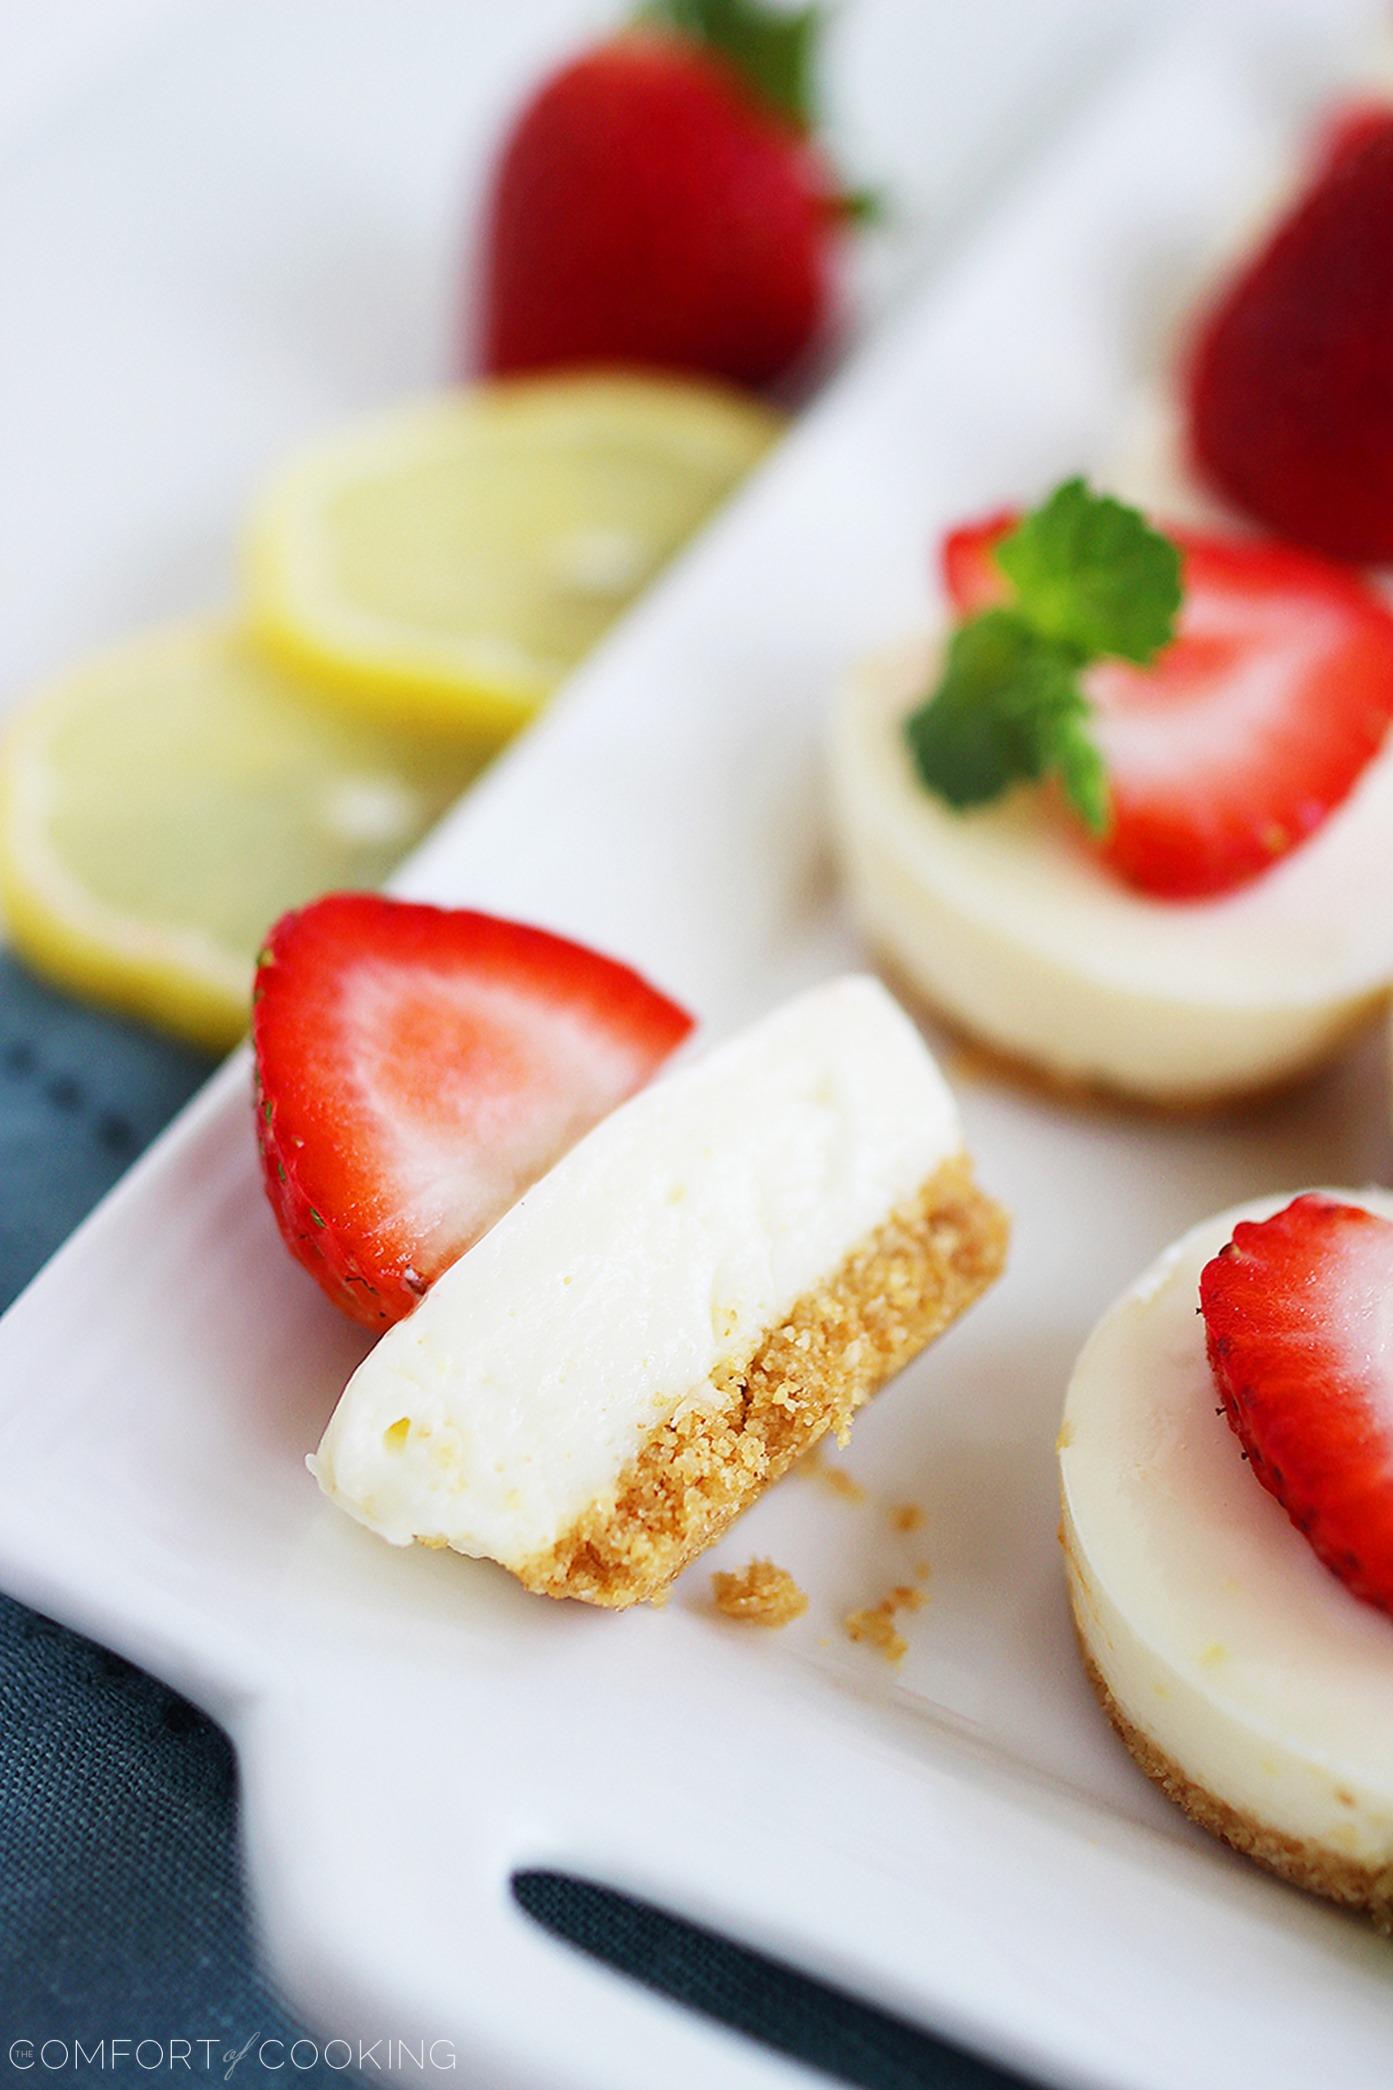 No-Bake Strawberry Lemonade Bites – These light, lemony no-bake bites topped with fresh strawberries are easy to make and totally addicting! | thecomfortofcooking.com